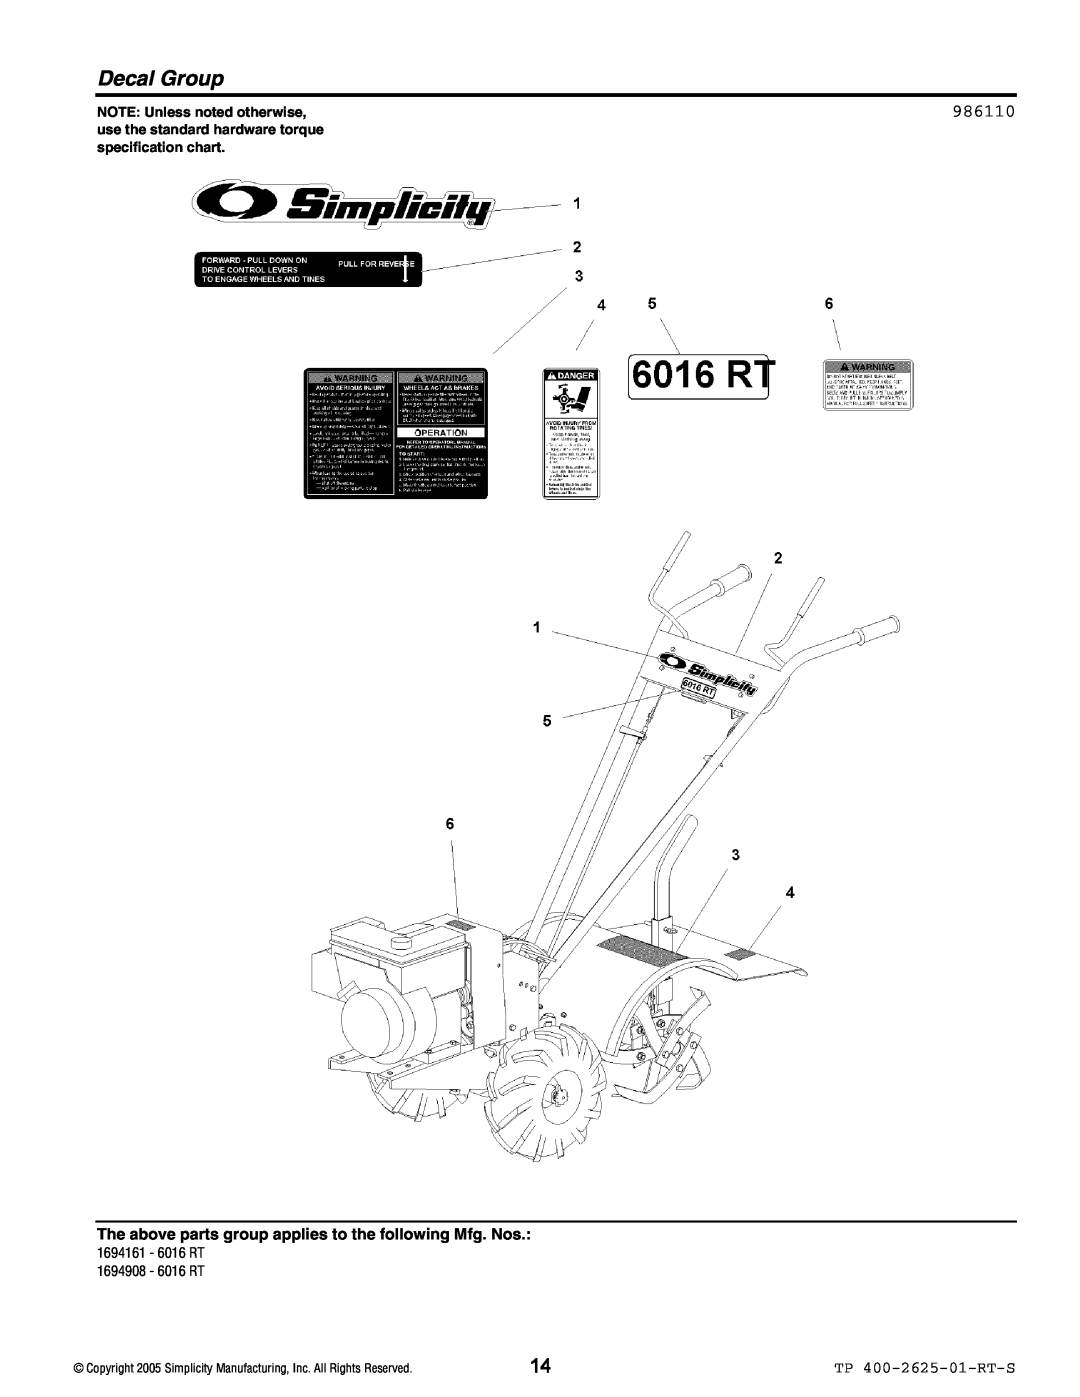 Simplicity 1694161, 6HP Series, 1730319, 1694908 manual Decal Group, 986110, TP 400-2625-01-RT-S, NOTE Unless noted otherwise 